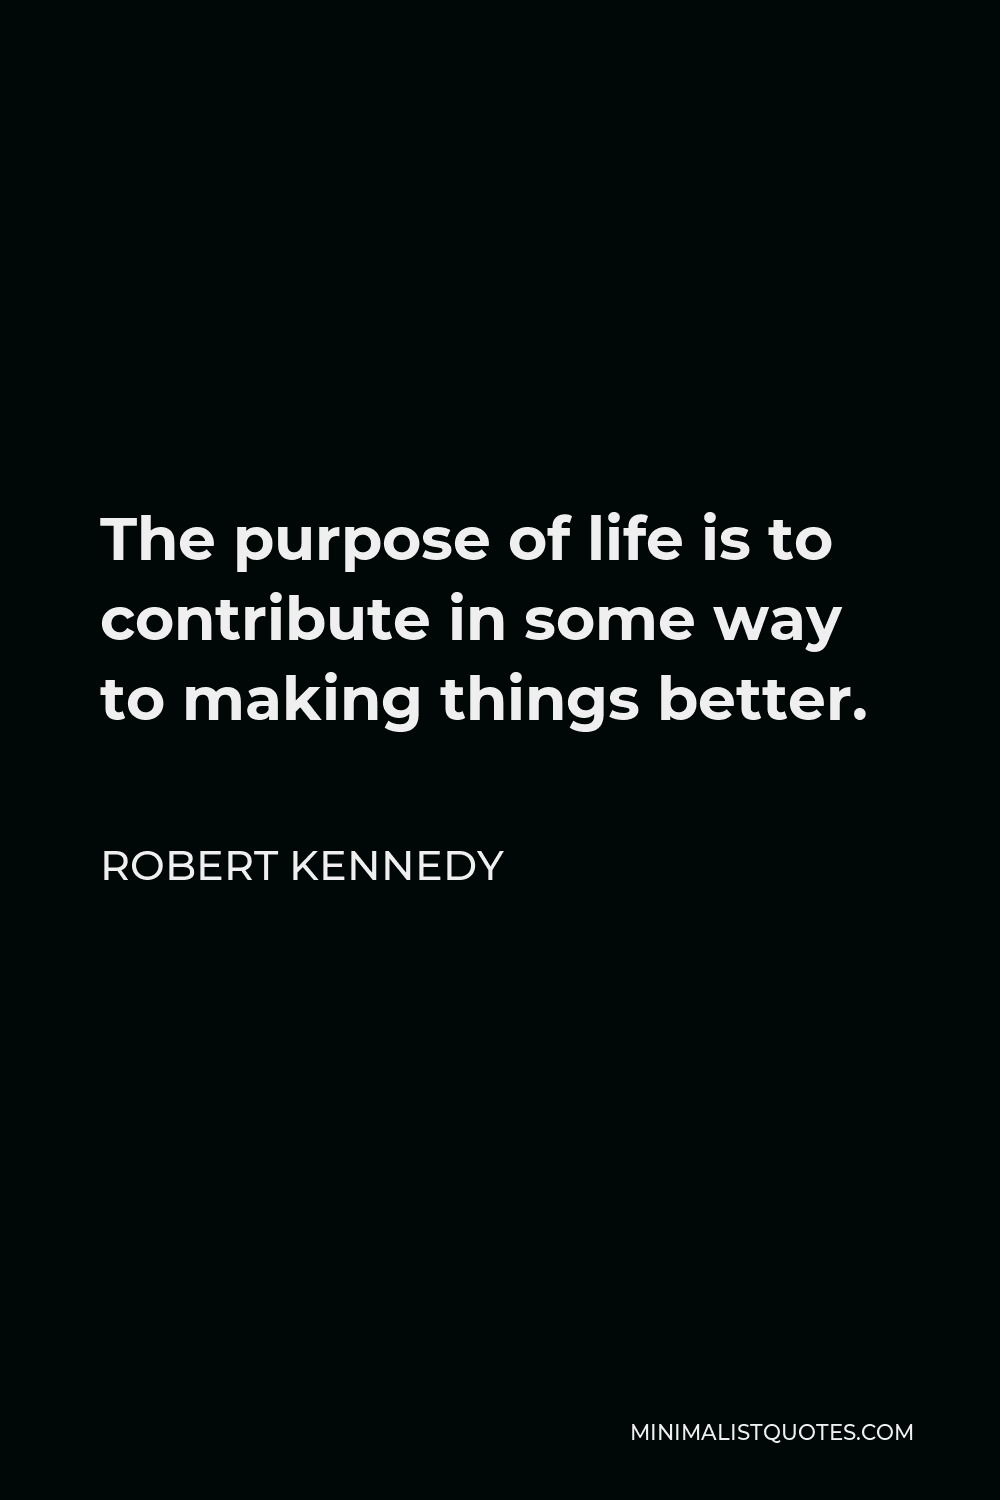 Robert Kennedy Quote - The purpose of life is to contribute in some way to making things better.